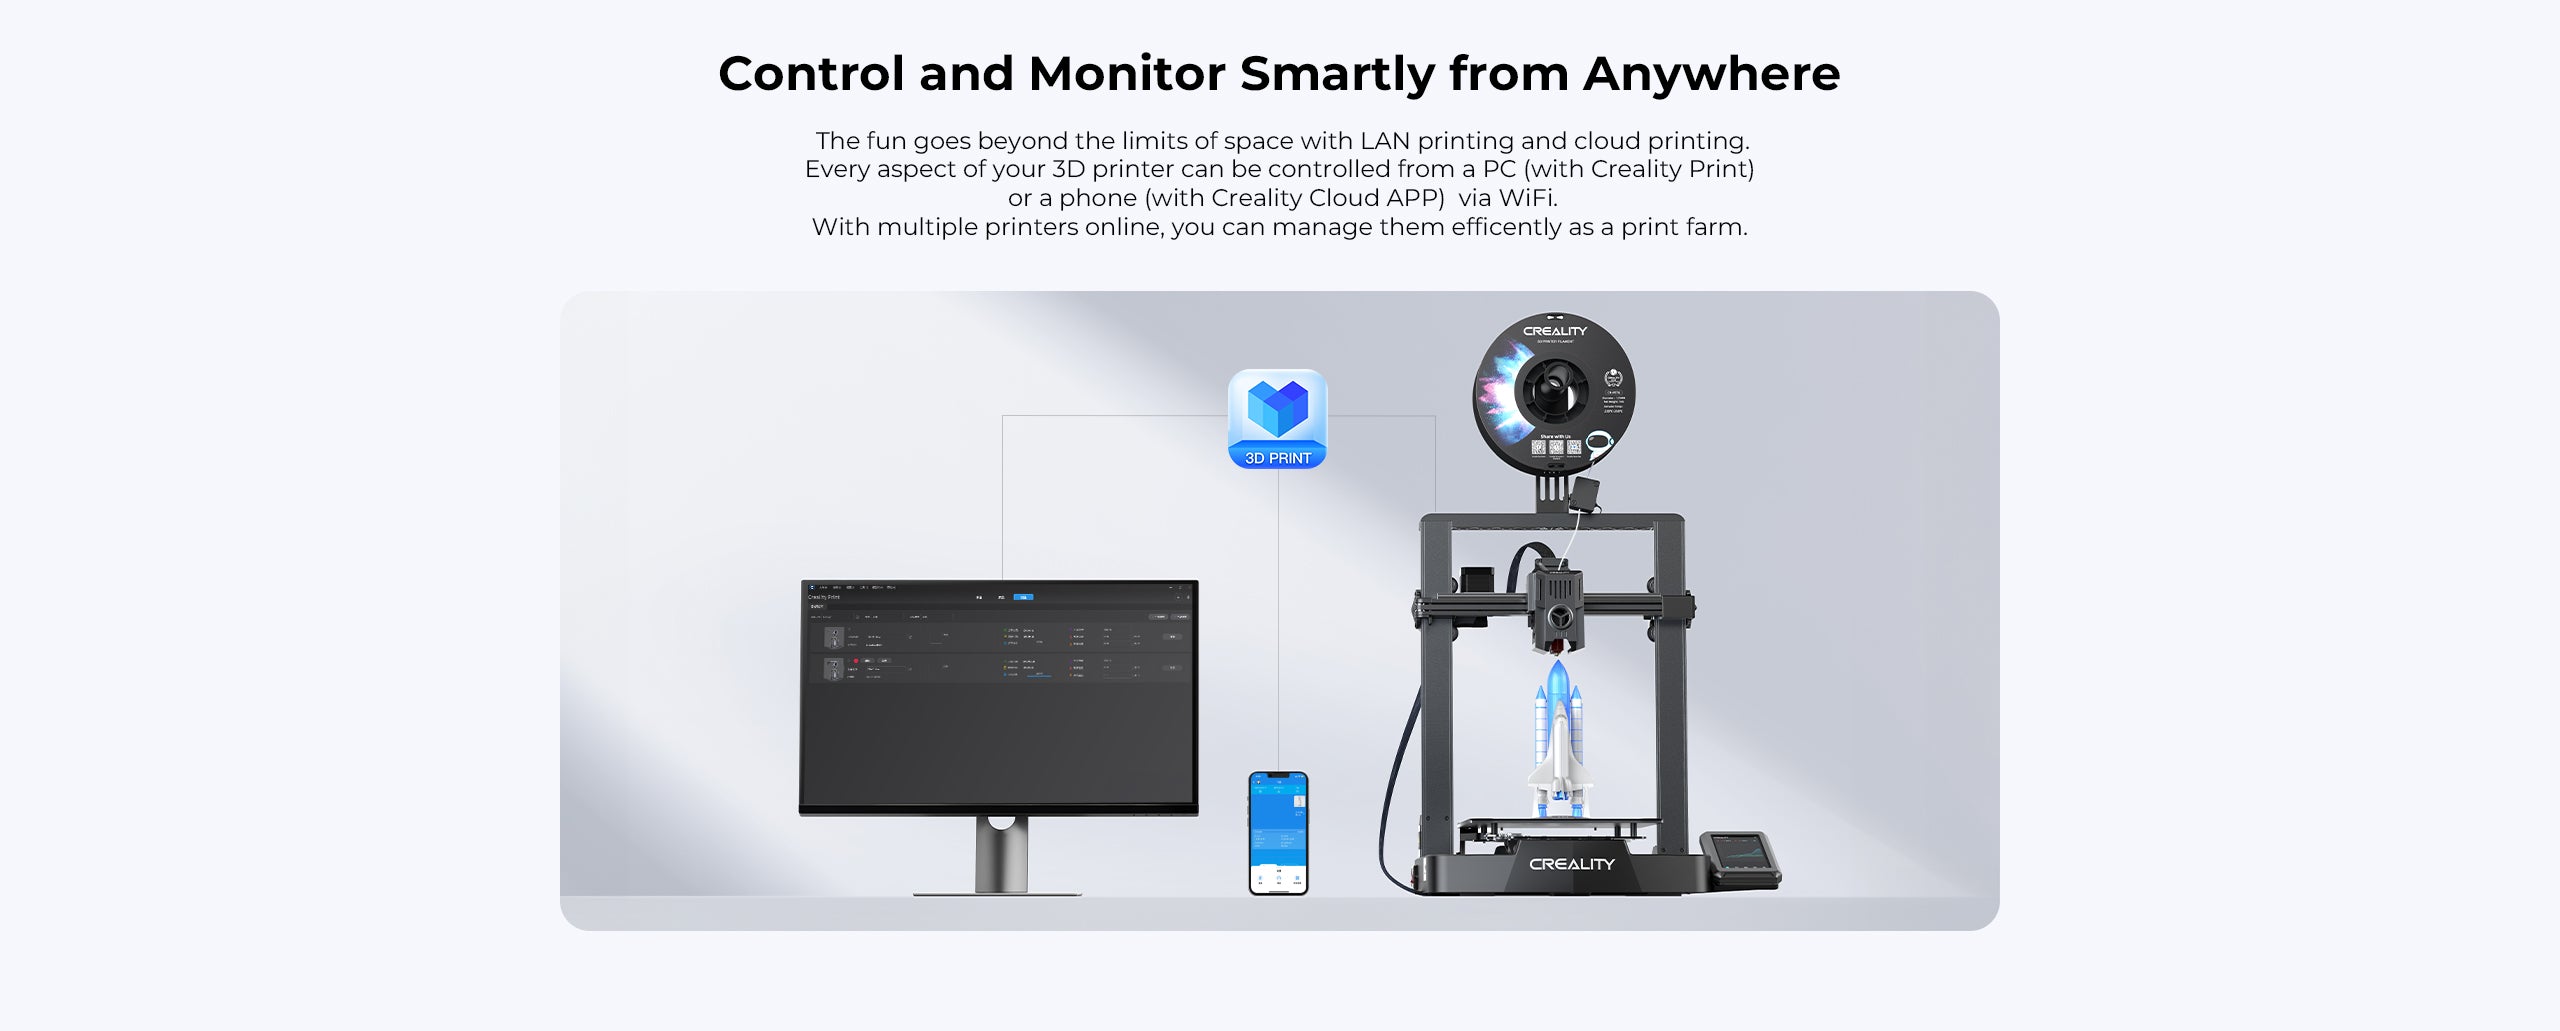 You can control and monitor smartly your ender 3 v3 3d printer from anywhere